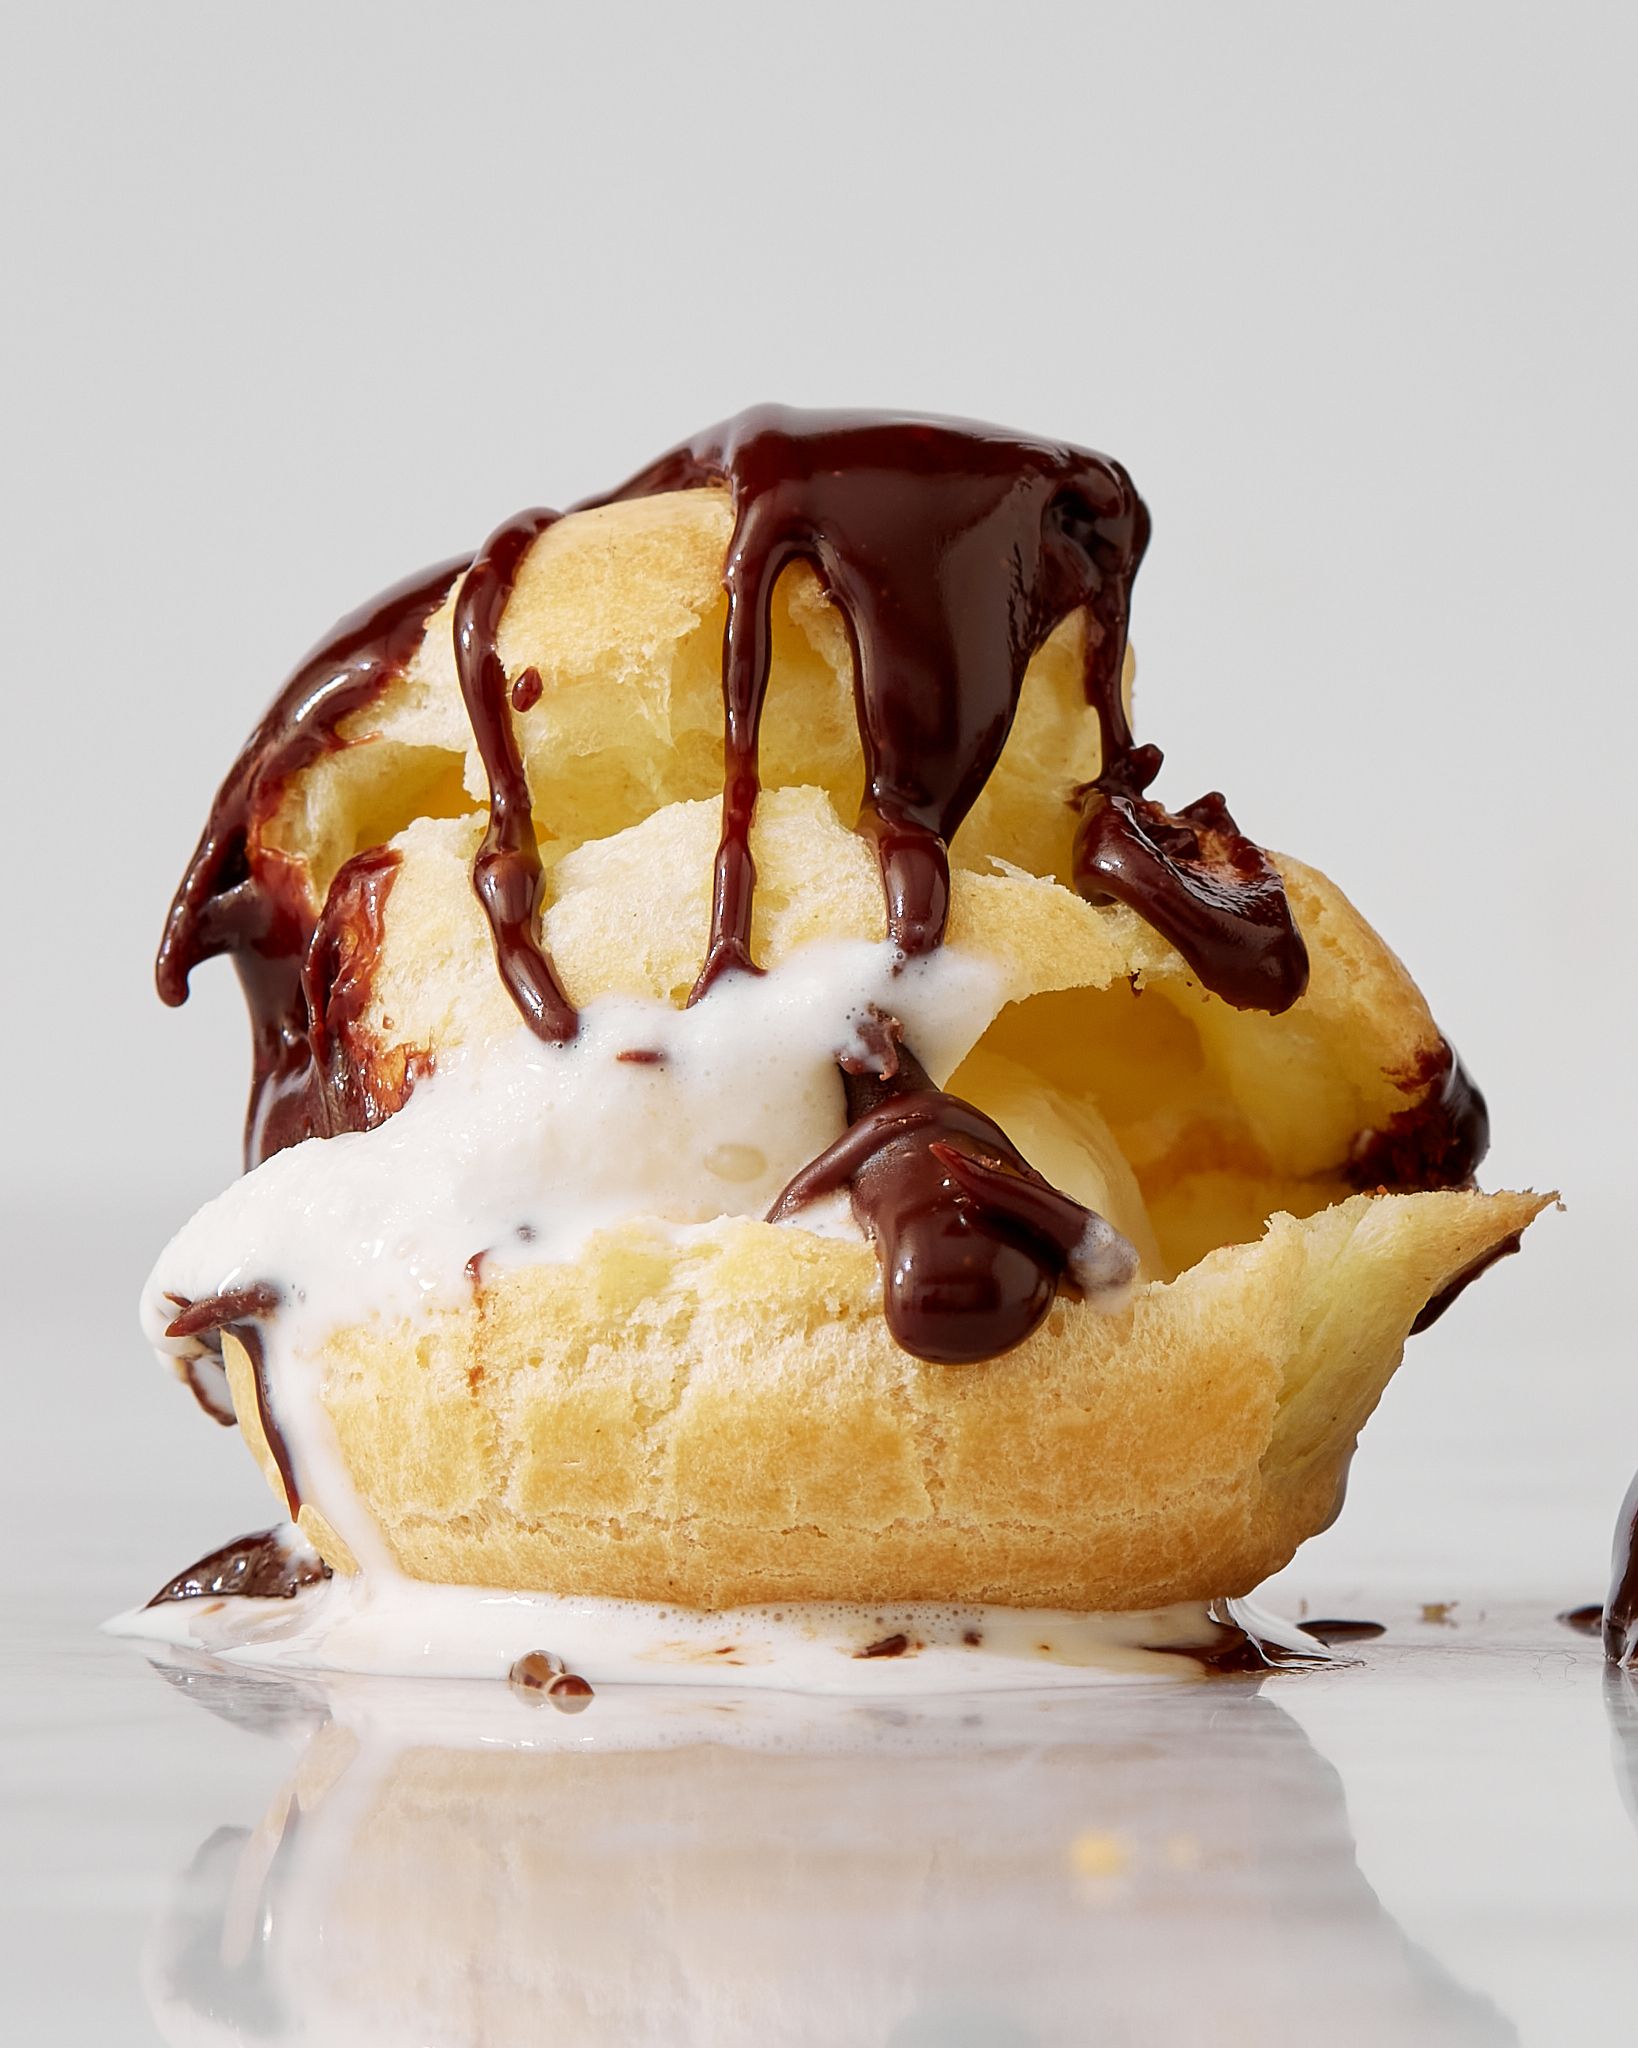 10 Easy French Desserts You Don't Have to Be a Pastry Chef to Master